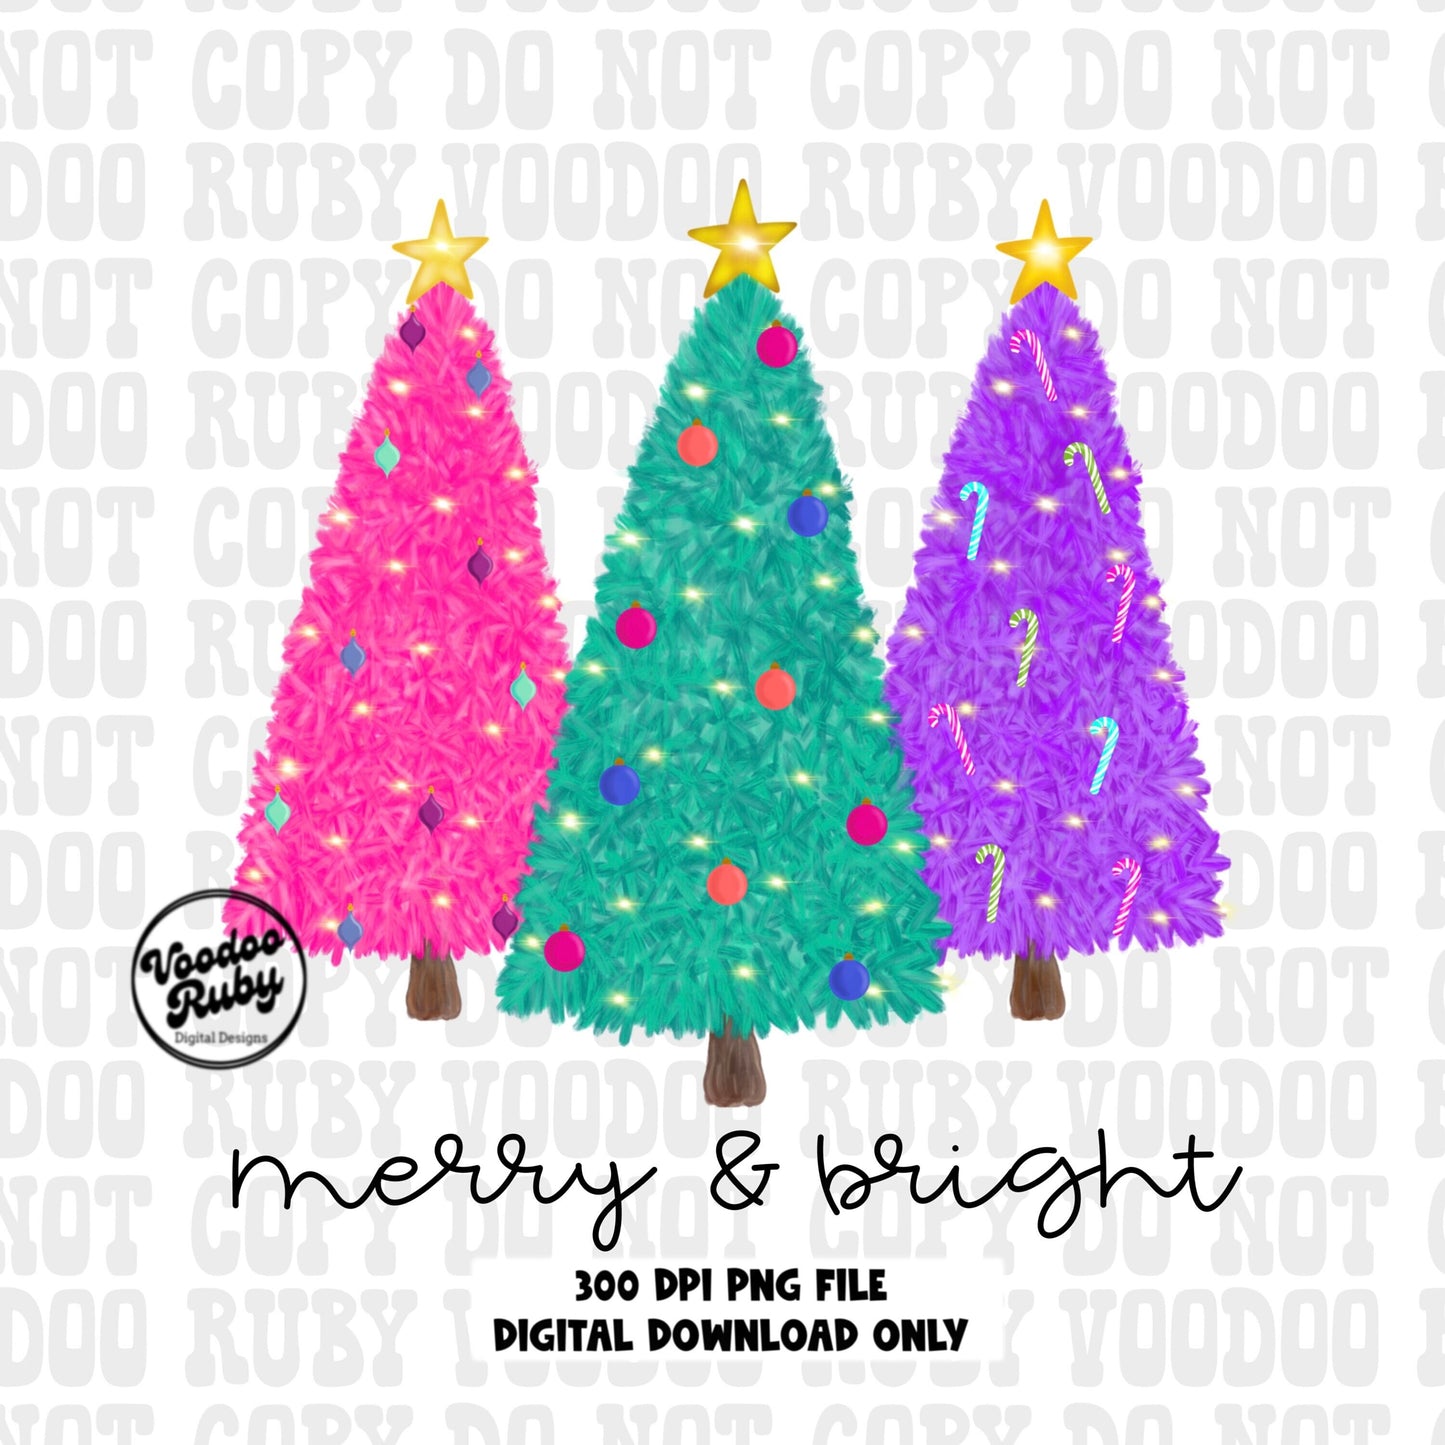 Merry and Bright PNG Christmas tree design brightly colored 300 dpi high resolution Christmas DTF printable